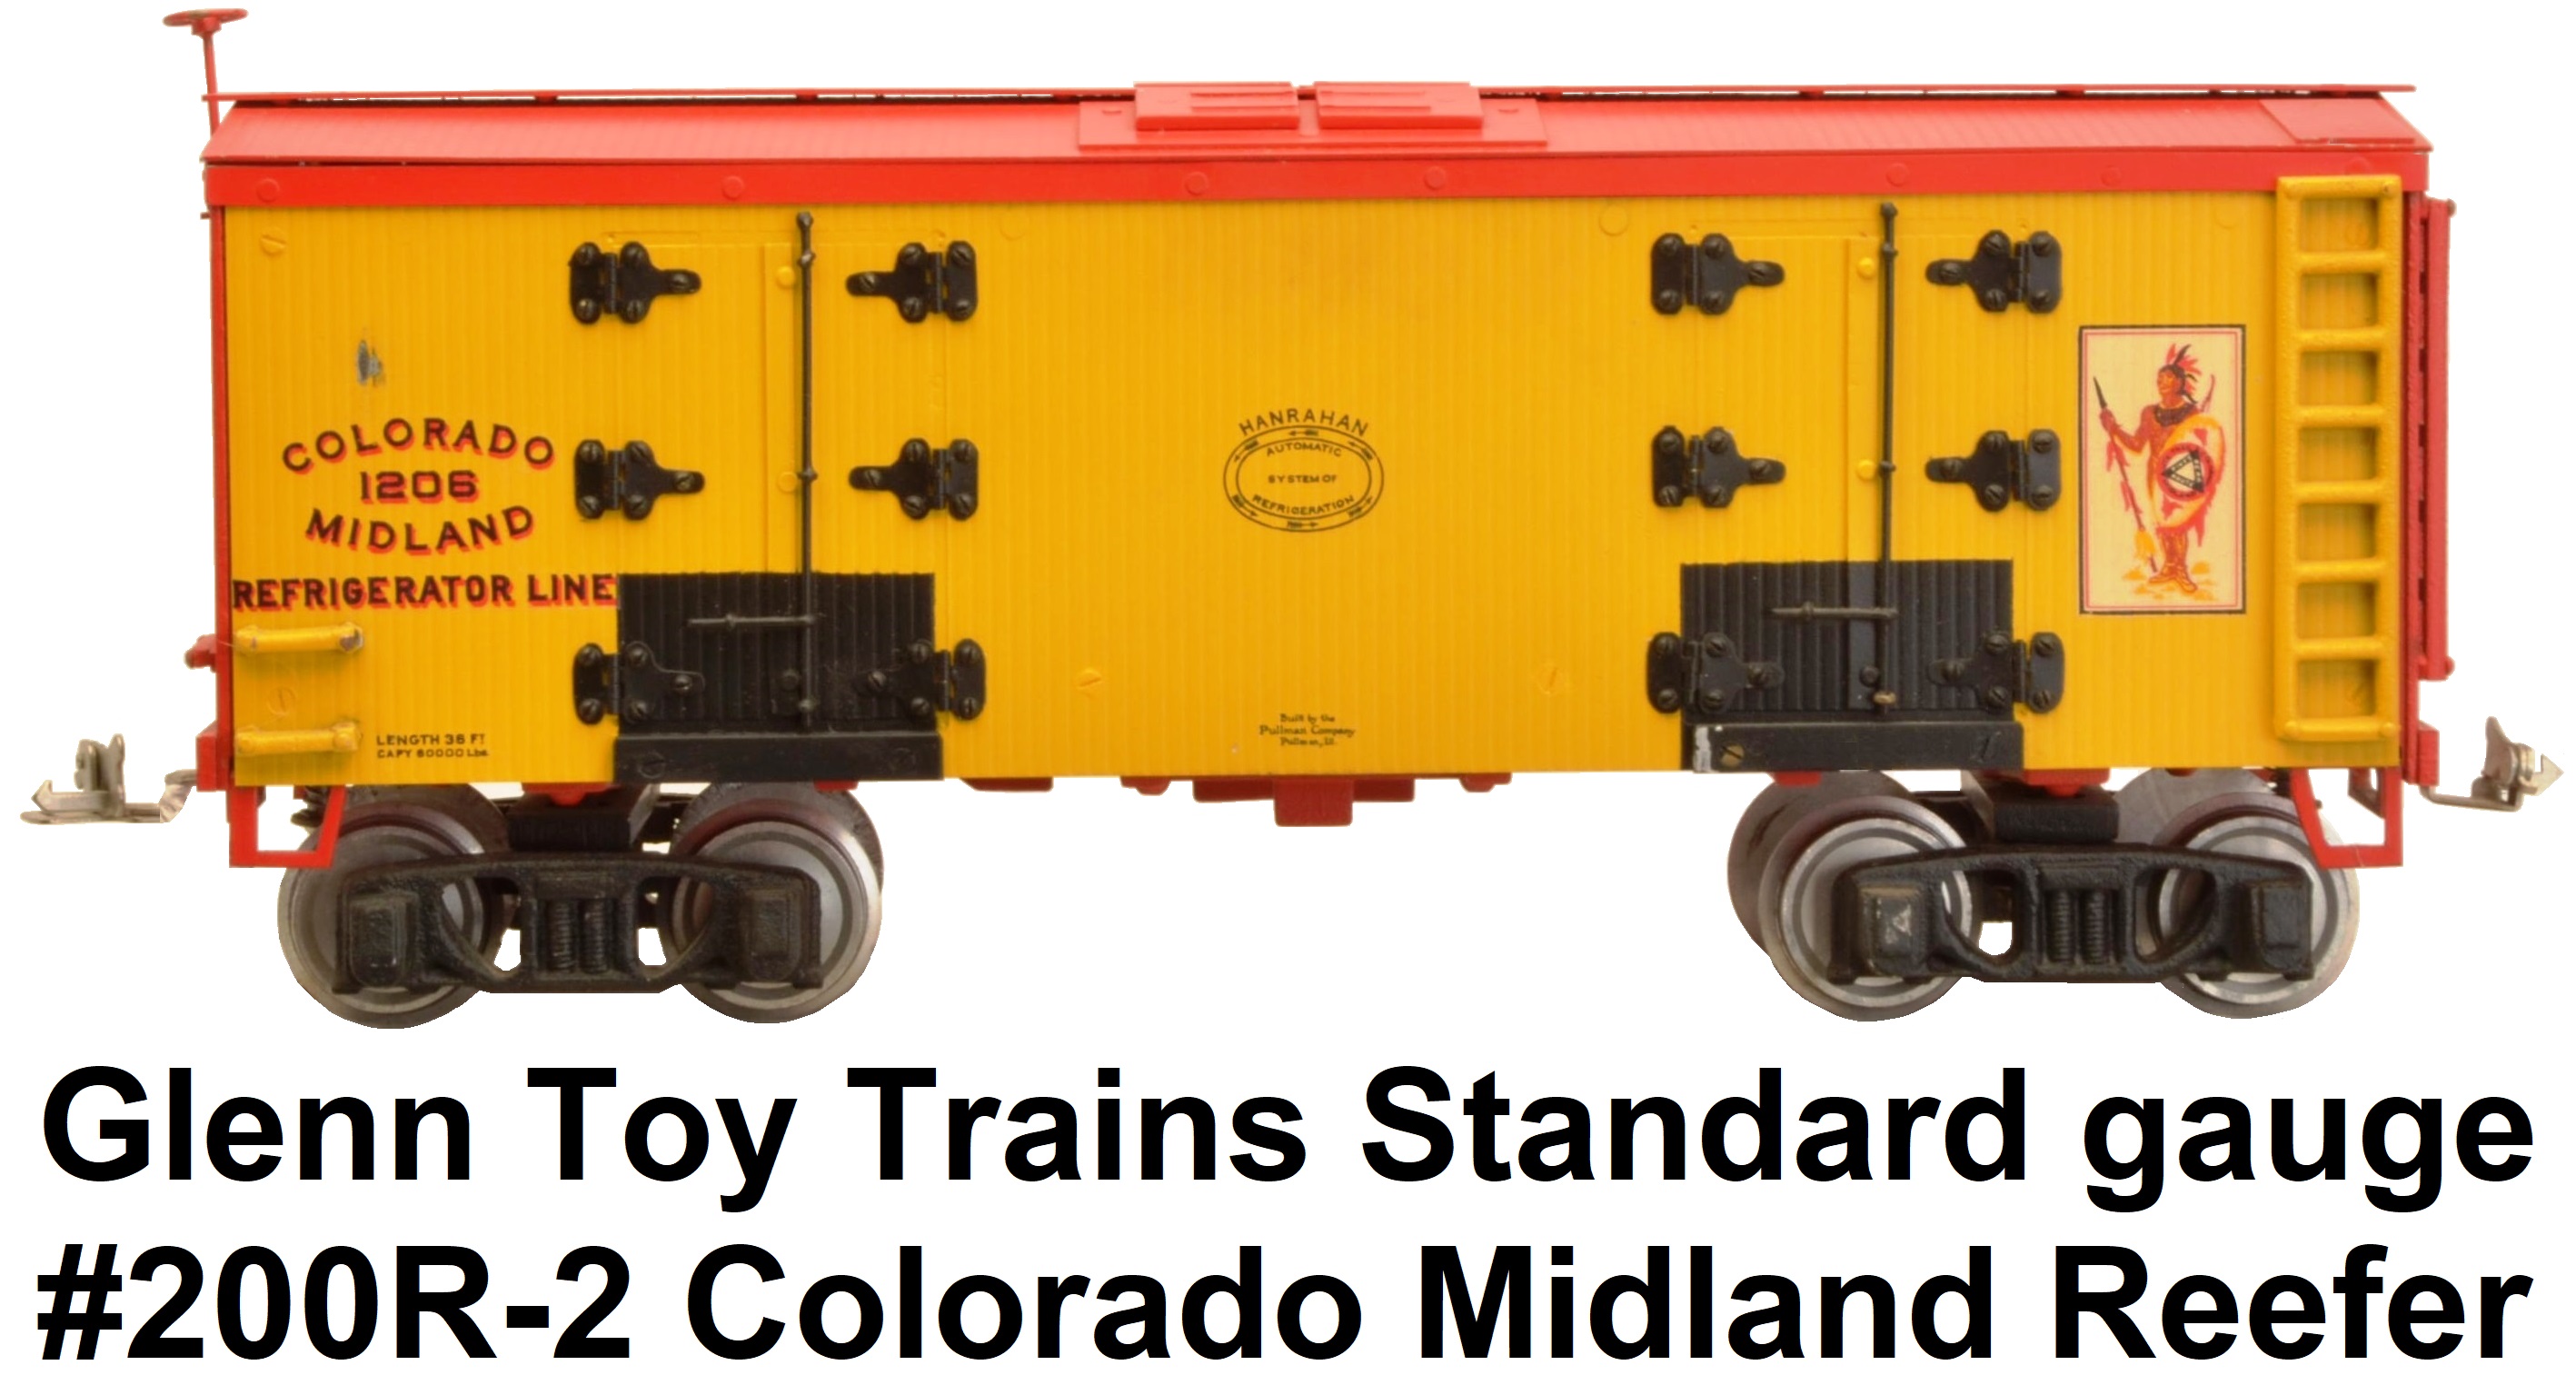 Glenn Toy Trains modern era standard gauge #200R-2 wooden yellow Colorado Midland refrigerator car with red ends and roof numbered 1206